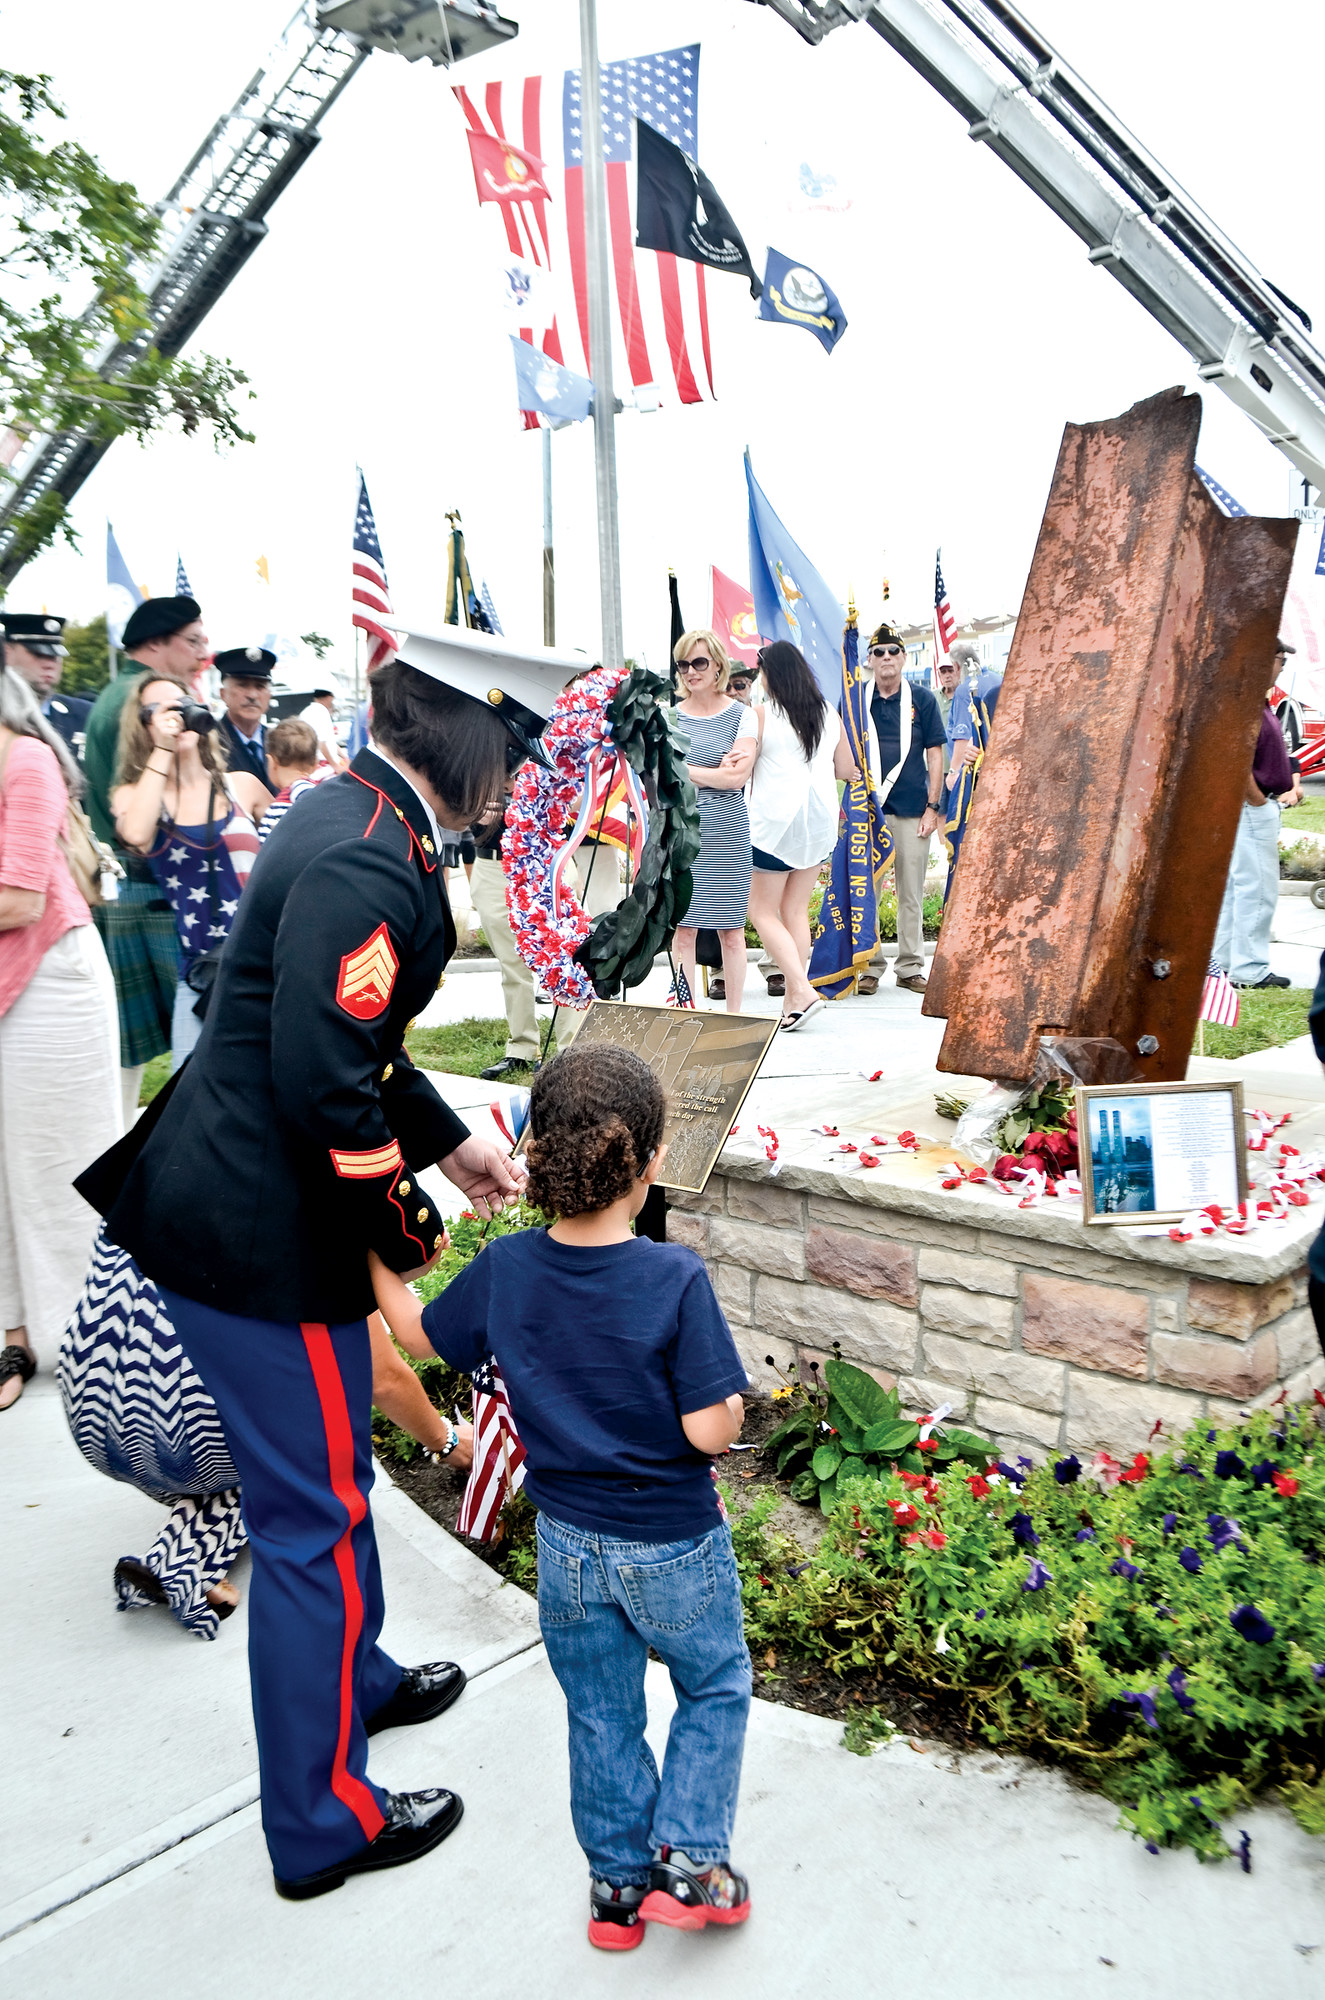 Marine Corps veteran Sgt. Ali Bardeguez-Perkins and her cousin Nikolas were among the roughly 200 residents who gathered at the VFW Plaza last Sunday, where a steel beam from the World Trade Center was dedicated to the first responders and other victims of the attacks on Sept. 11, 2001.